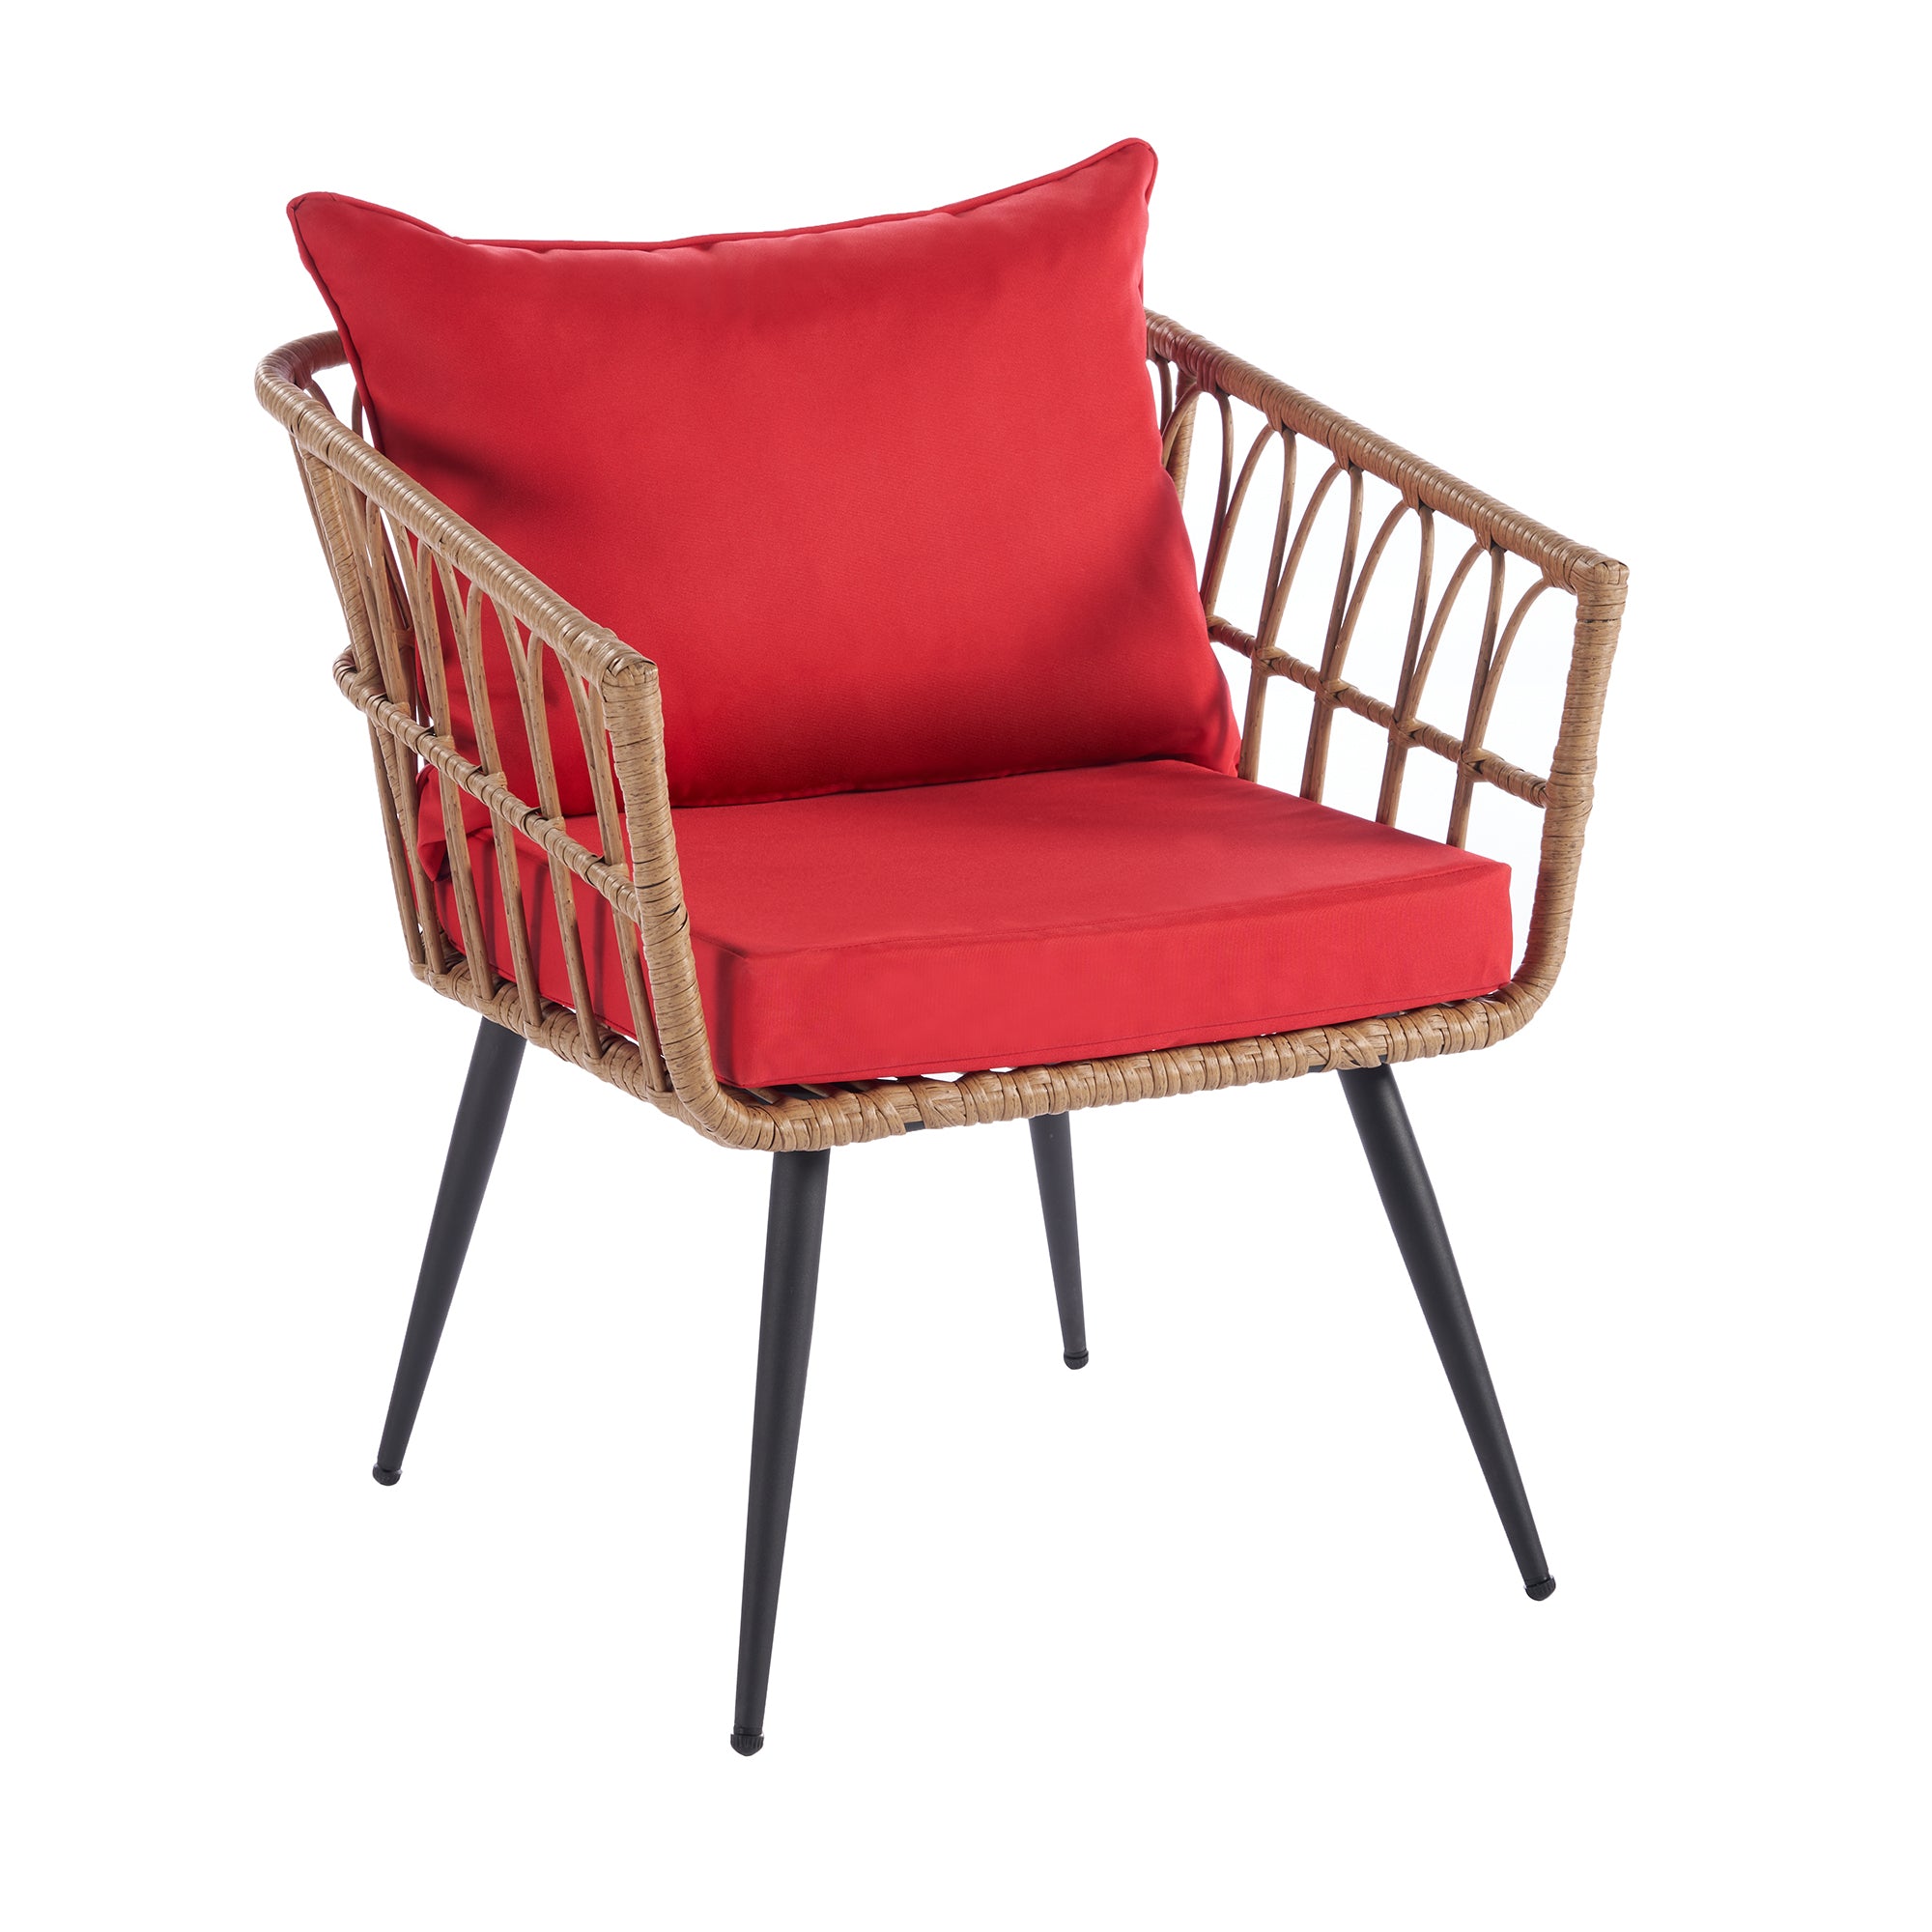 4 Pieces Outdoor Rattan Chair Set with Red Cushions